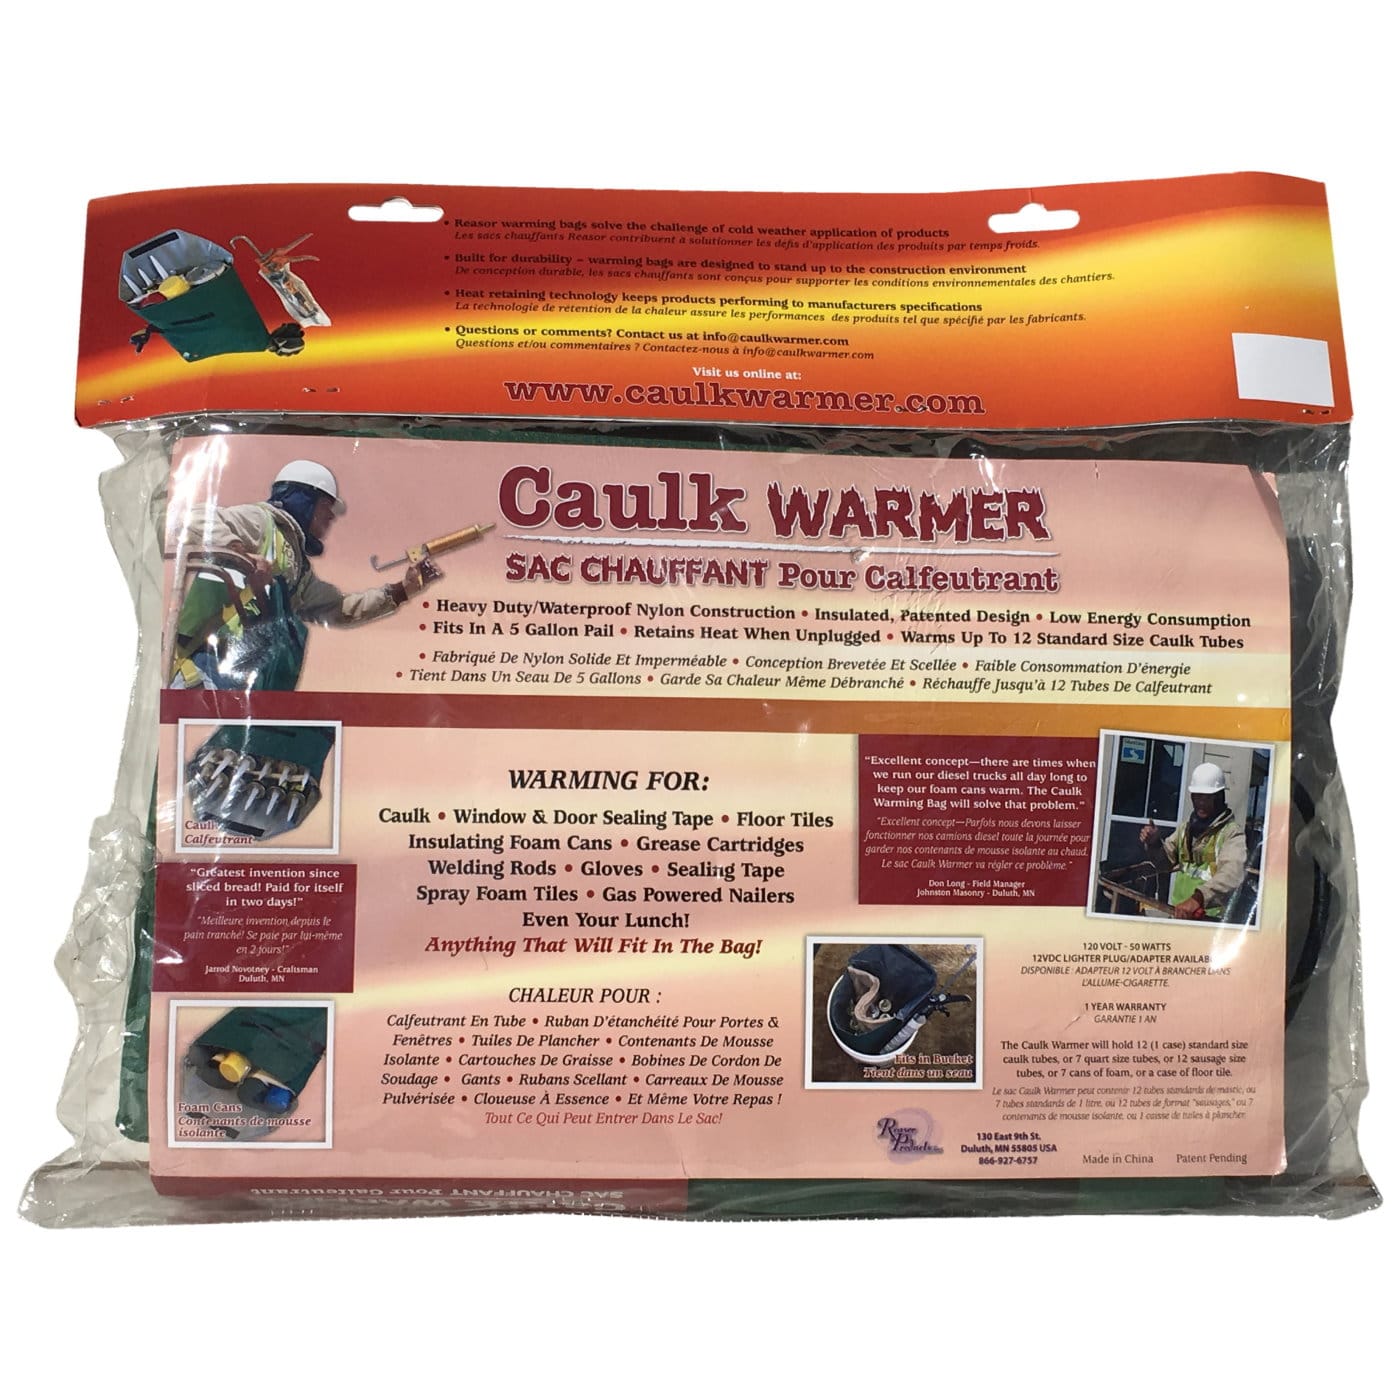 Caulk Warmer Bag Pouch Warming for Tubes, Sausages, Foam Cans, Tapes -  Arctic Warmers